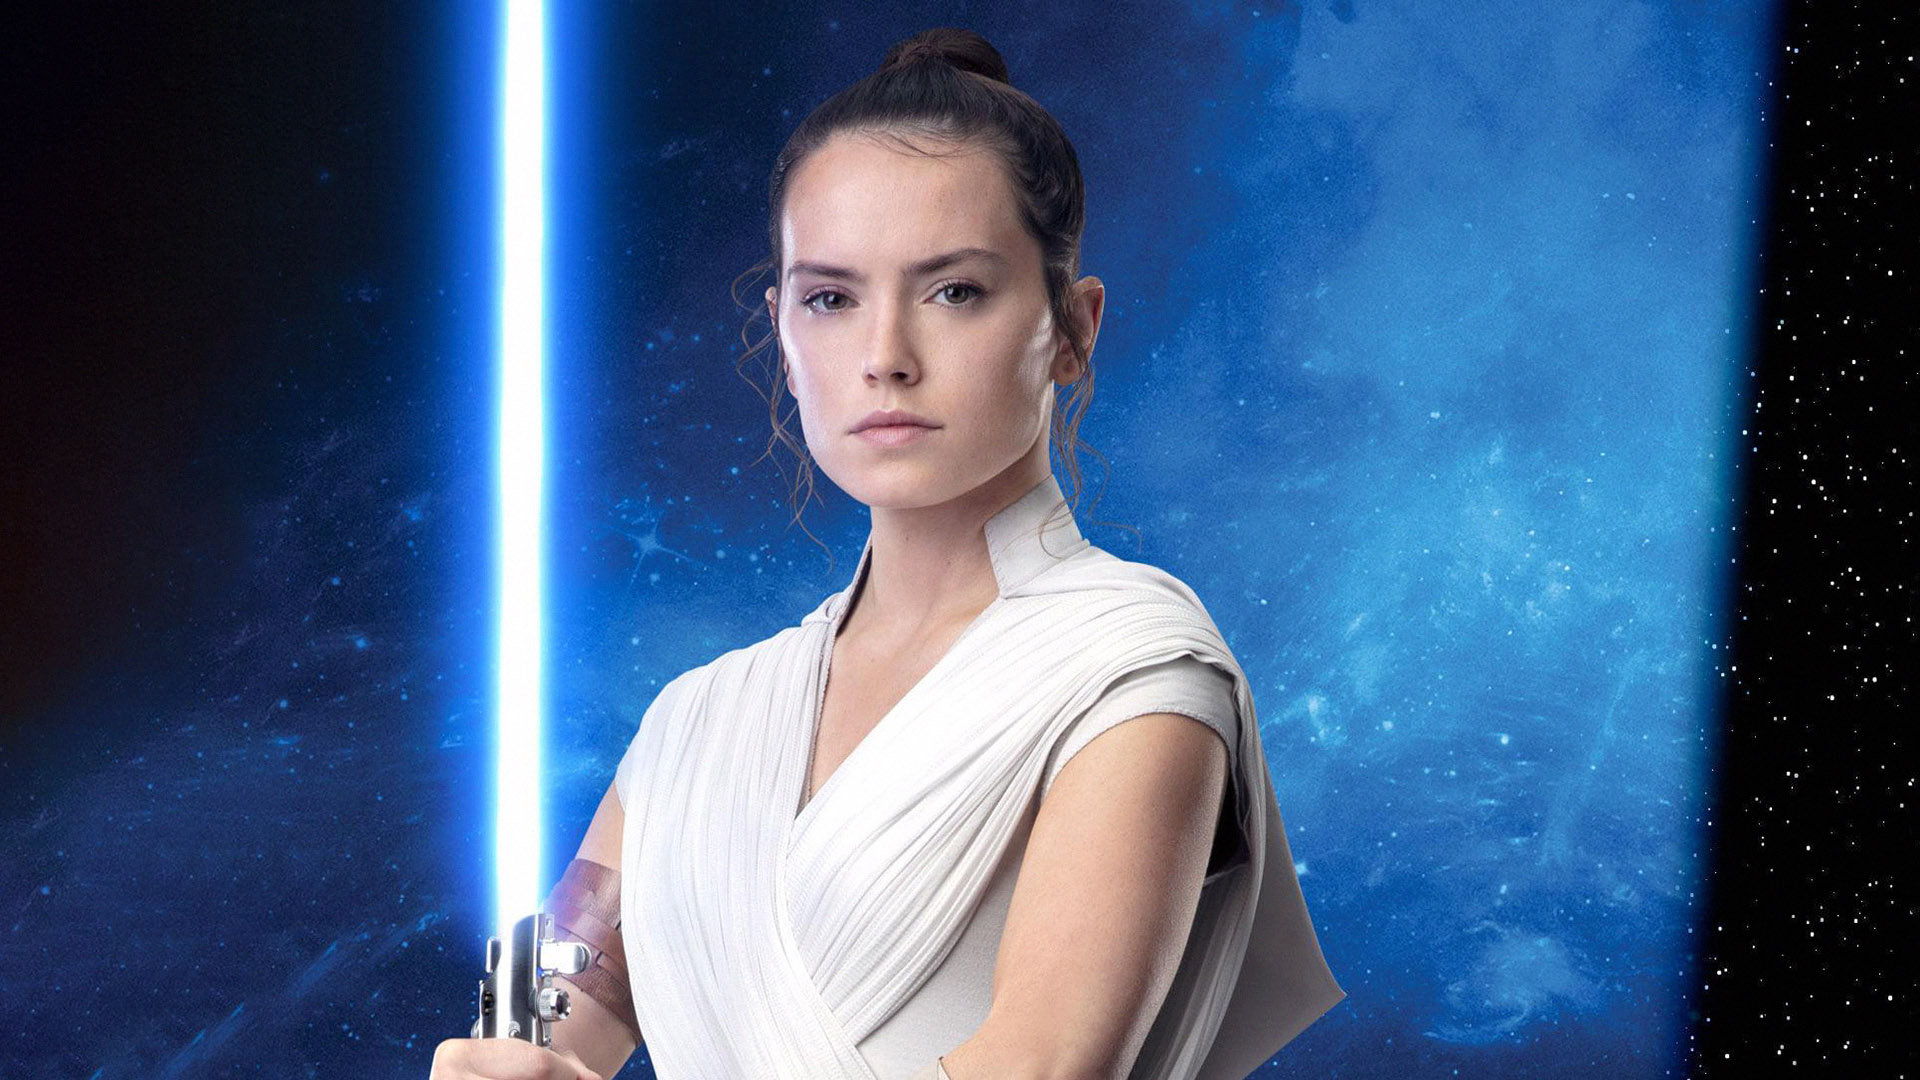 So What Happened to Daisy Ridley's Star Wars Movie and Will It Get Released After All?